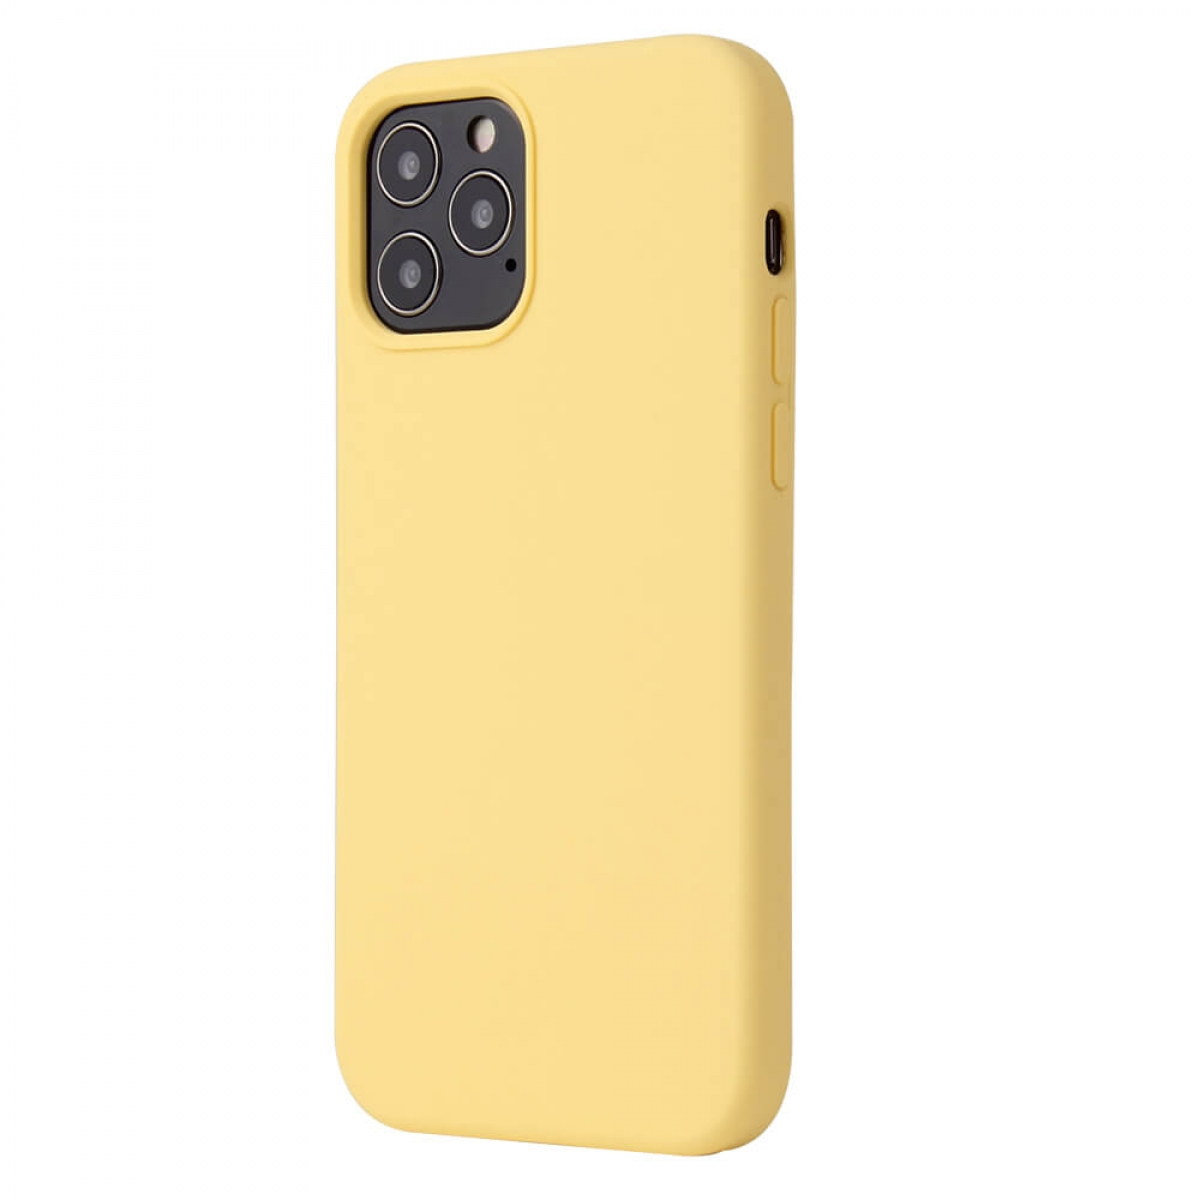 iPhone Backcover, Pro 15 Yellow Apple, Liquid, Canary Max, CASEONLINE